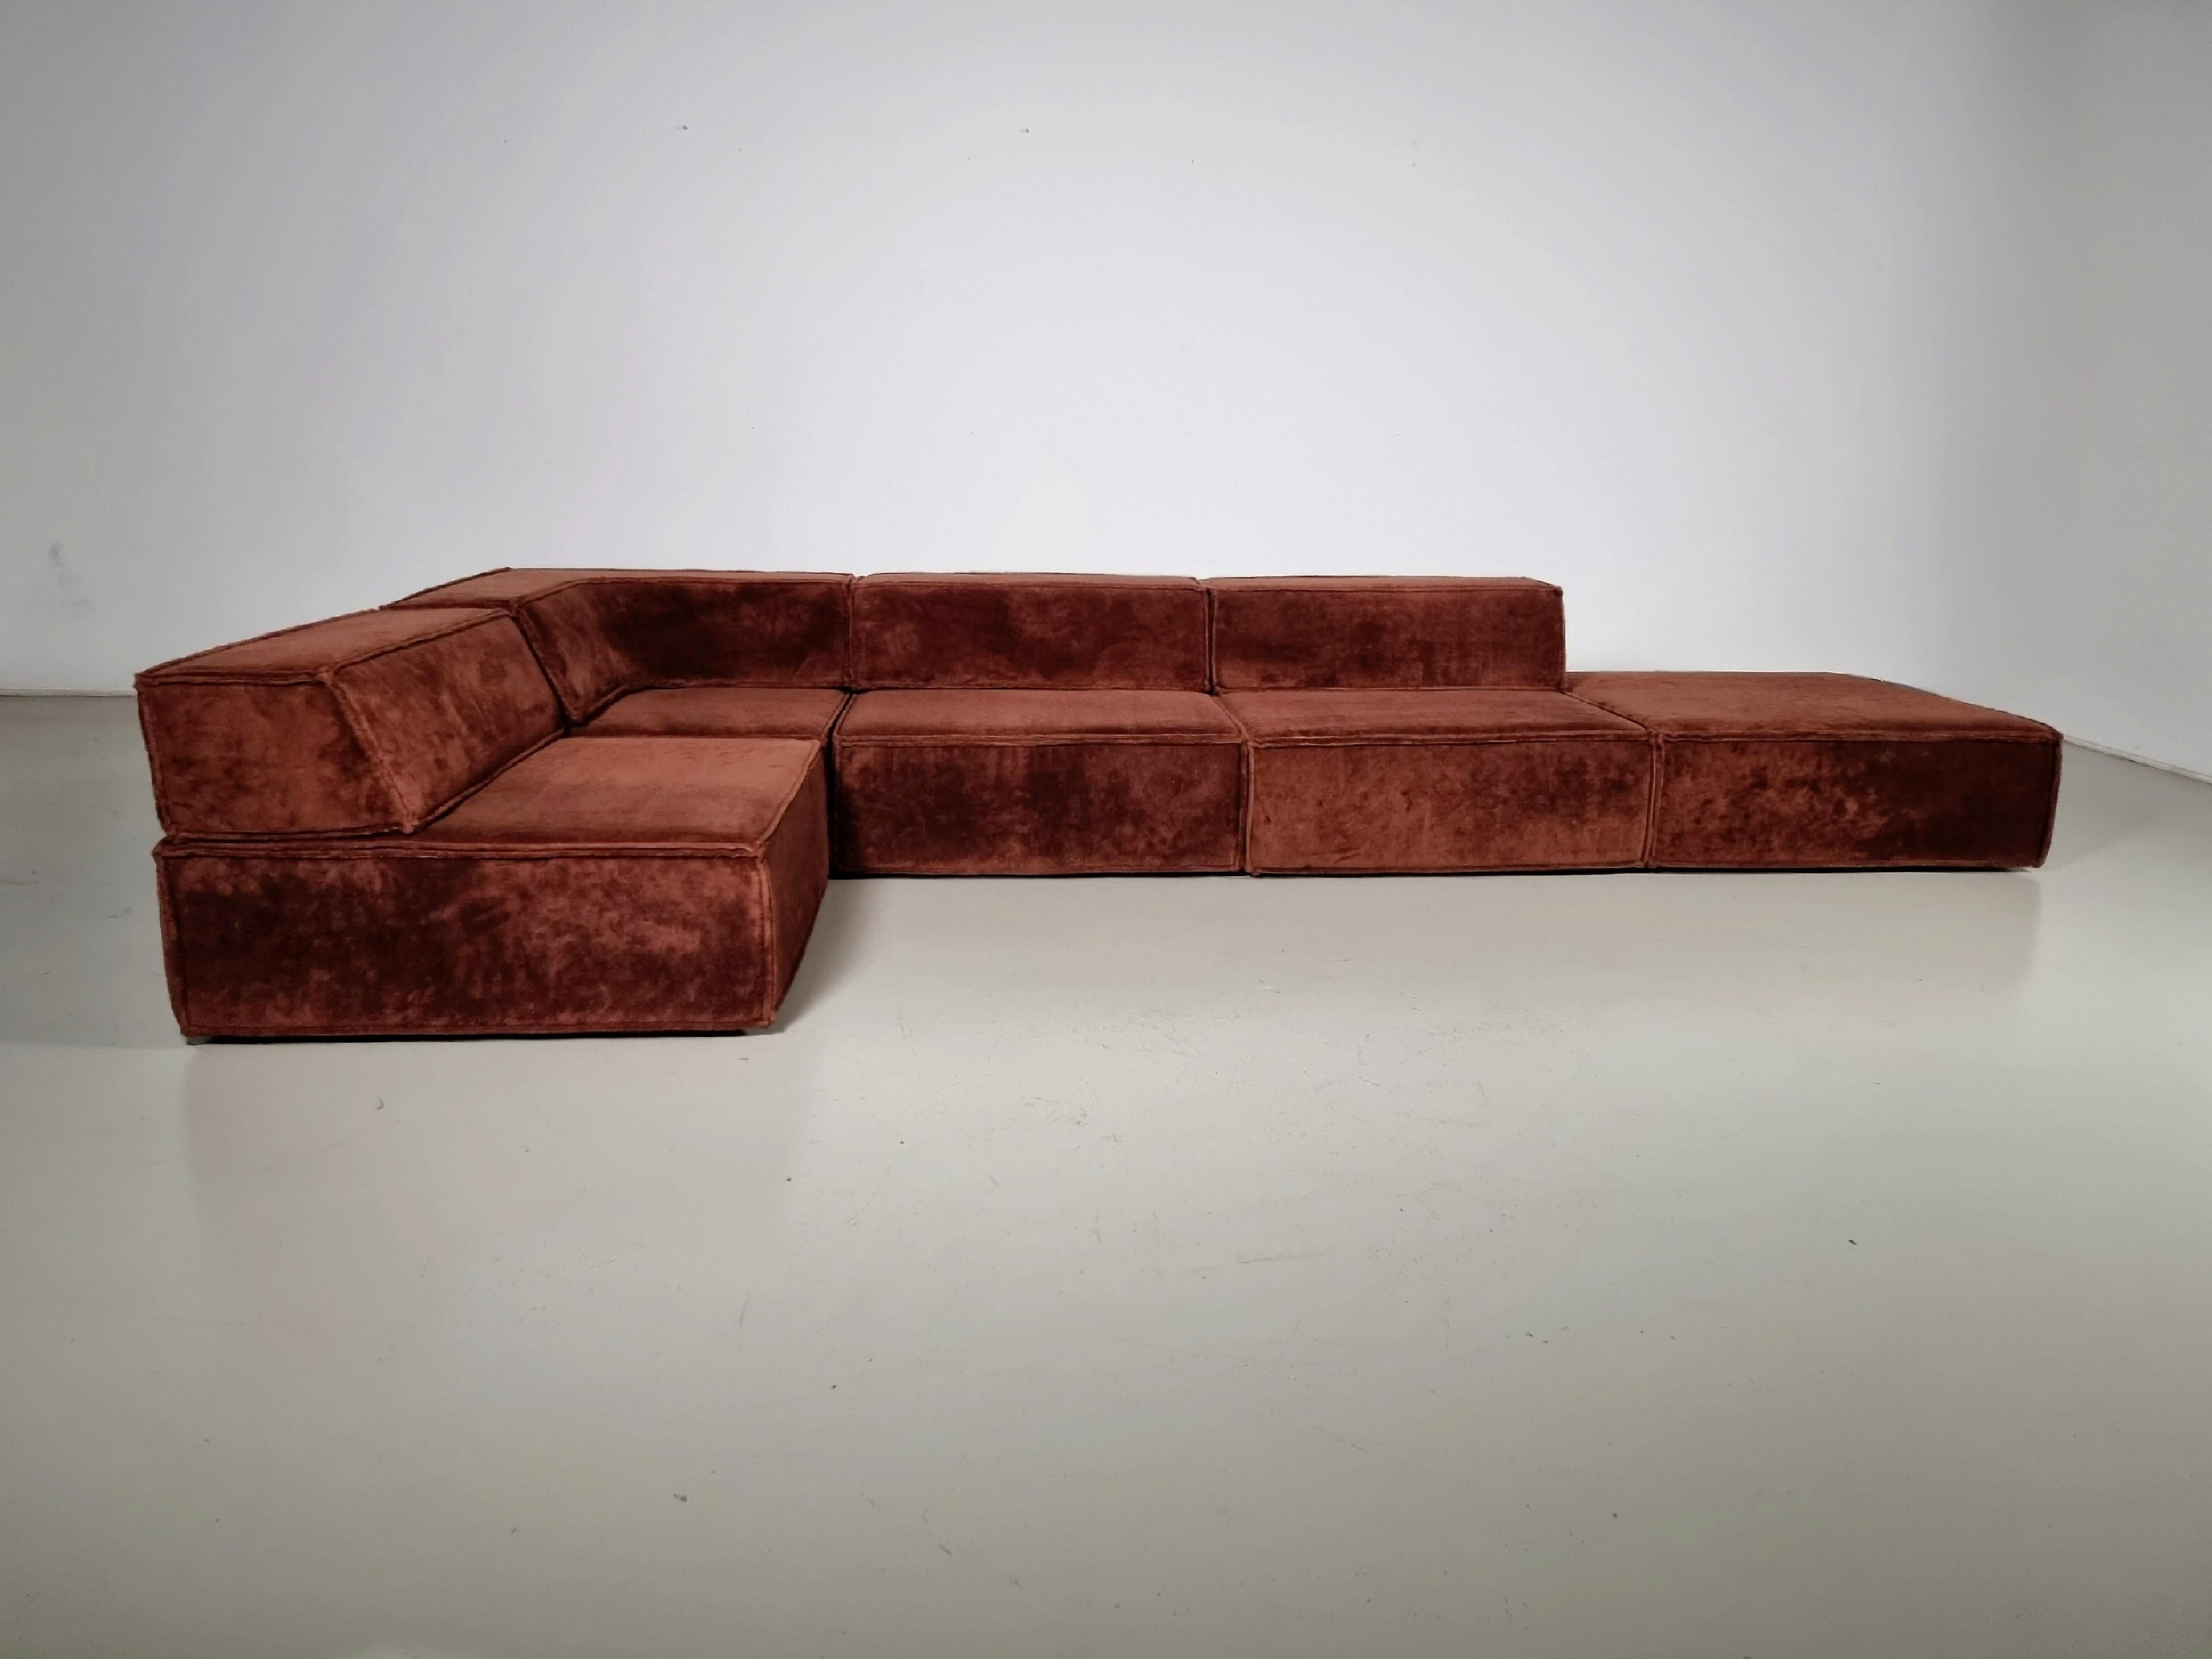 COR Trio Sofa by Team Form Ag in brown original fabric, COR Furniture, Germany 1